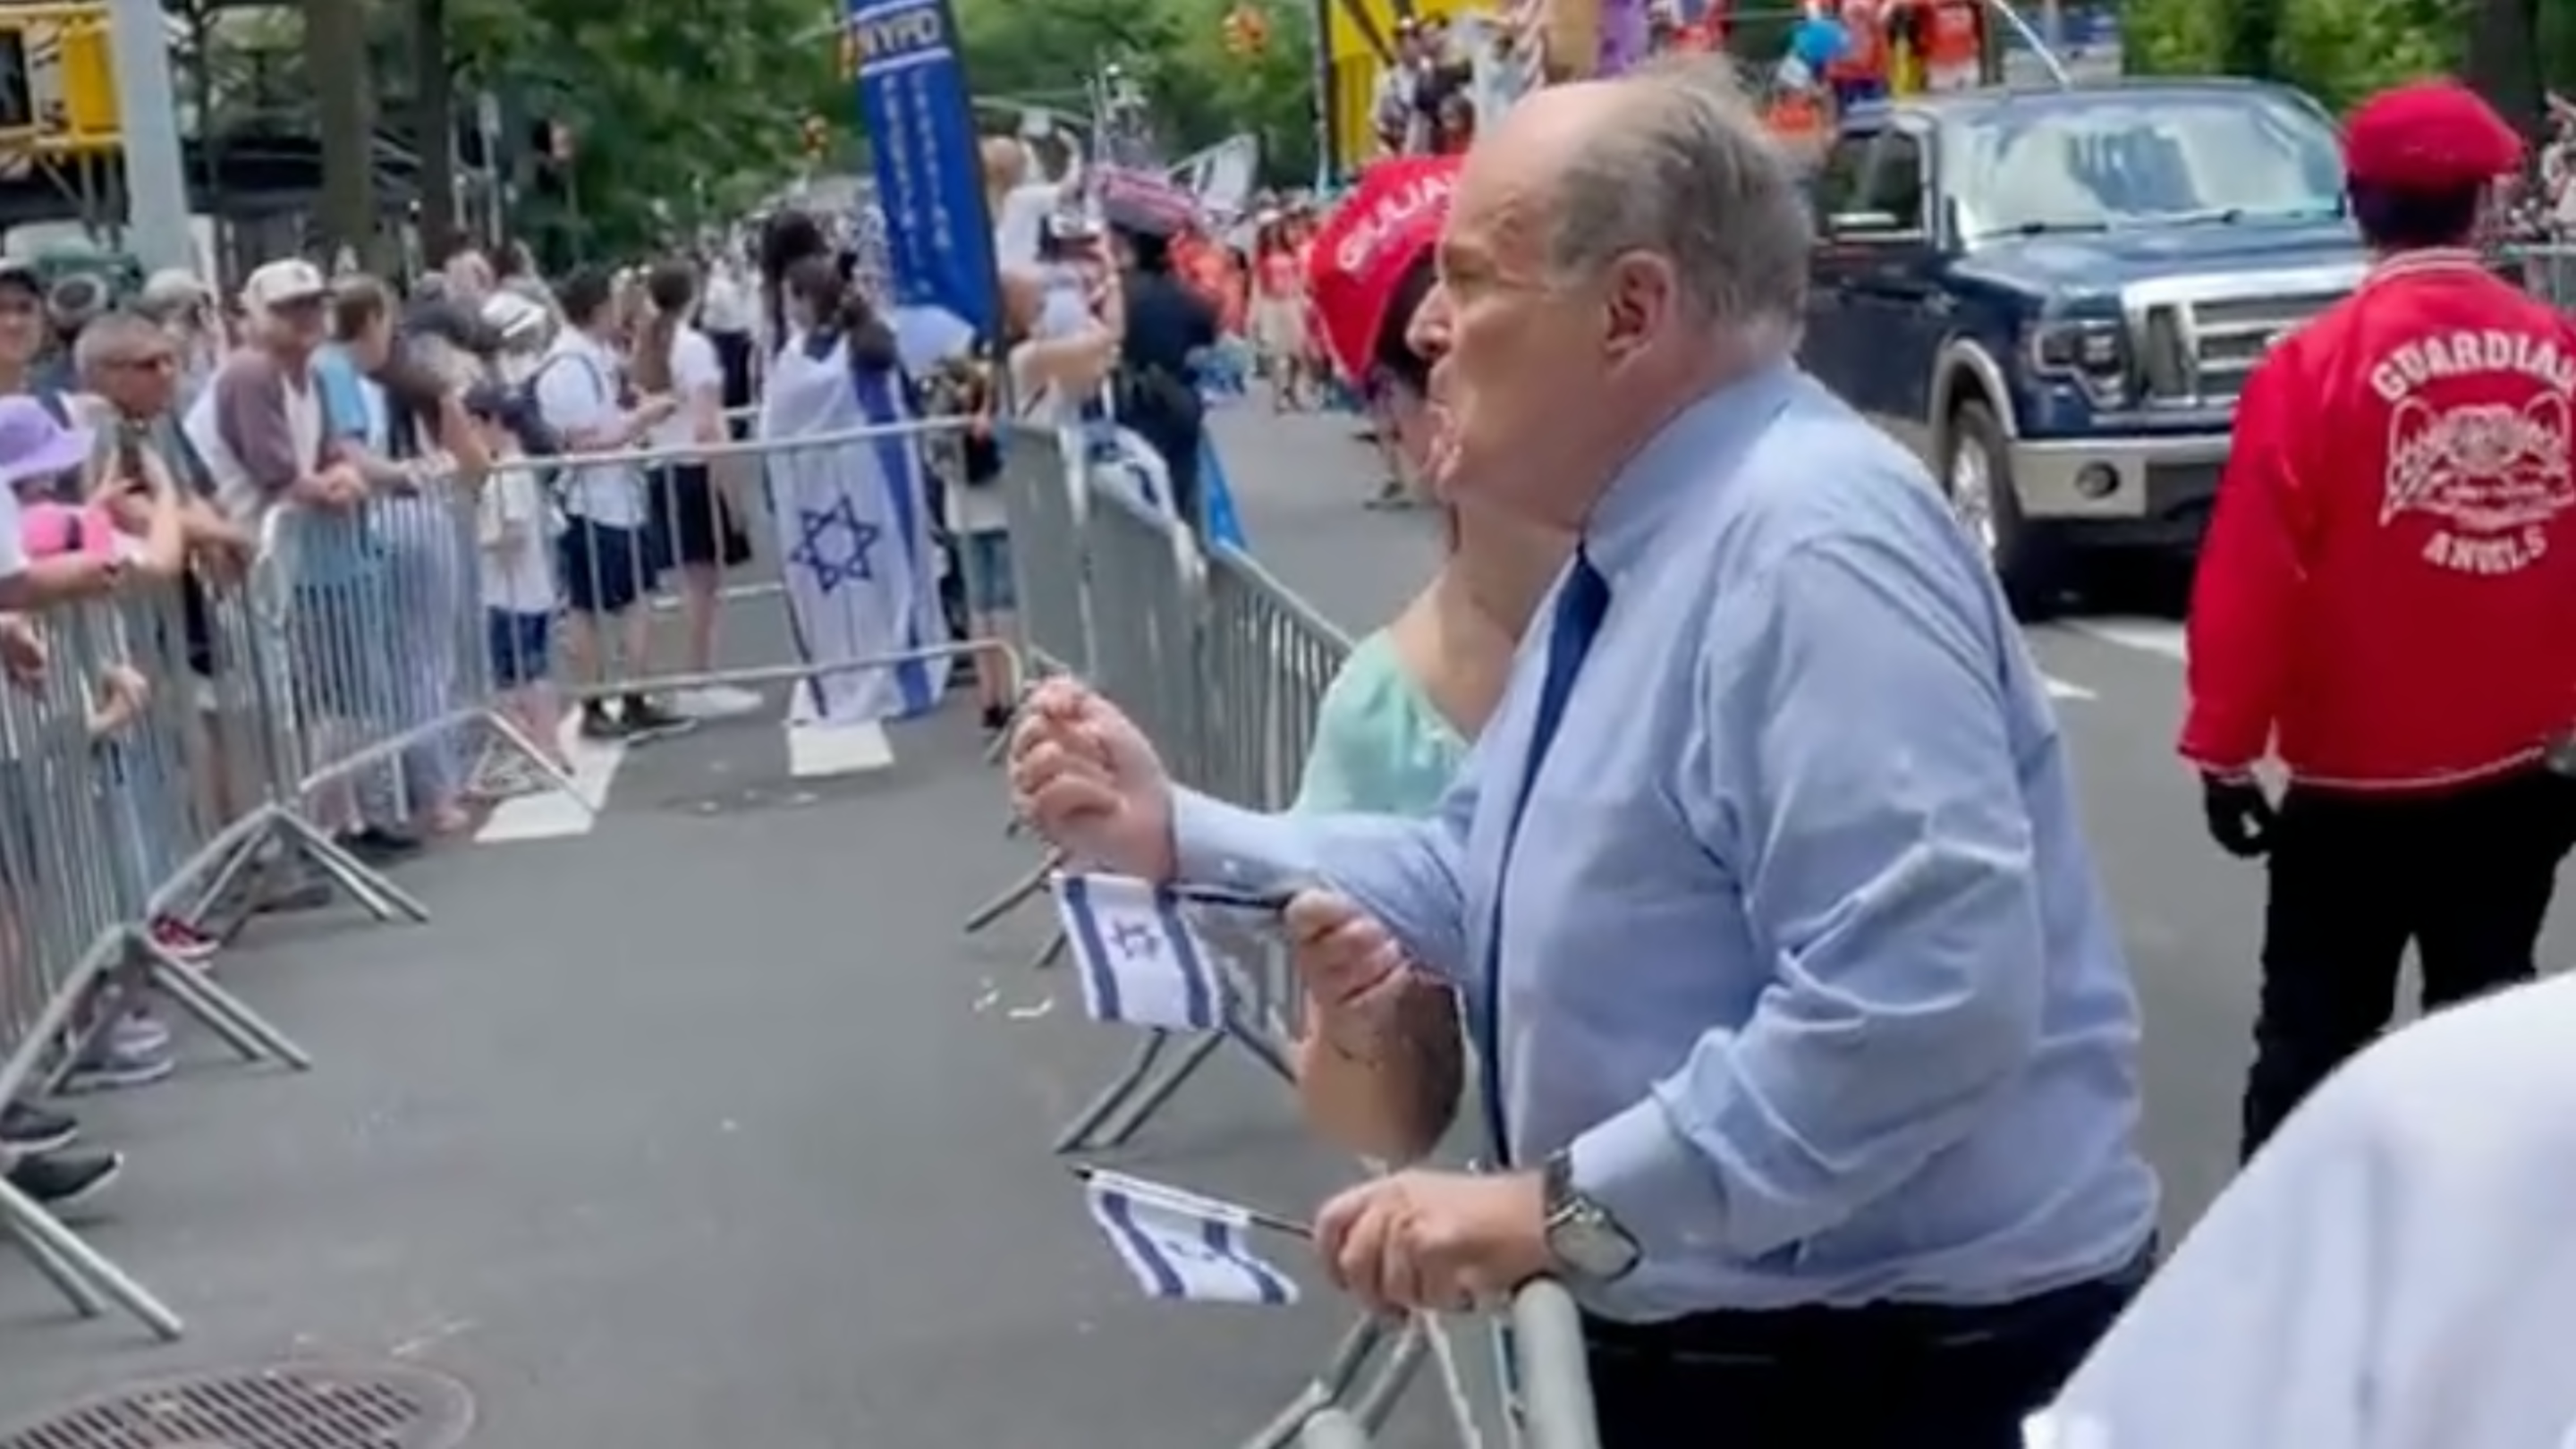 Rudy Giuliani, Marching in NYC Celebrate Israel Parade, Stops to Call
Someone a 'Jackass'